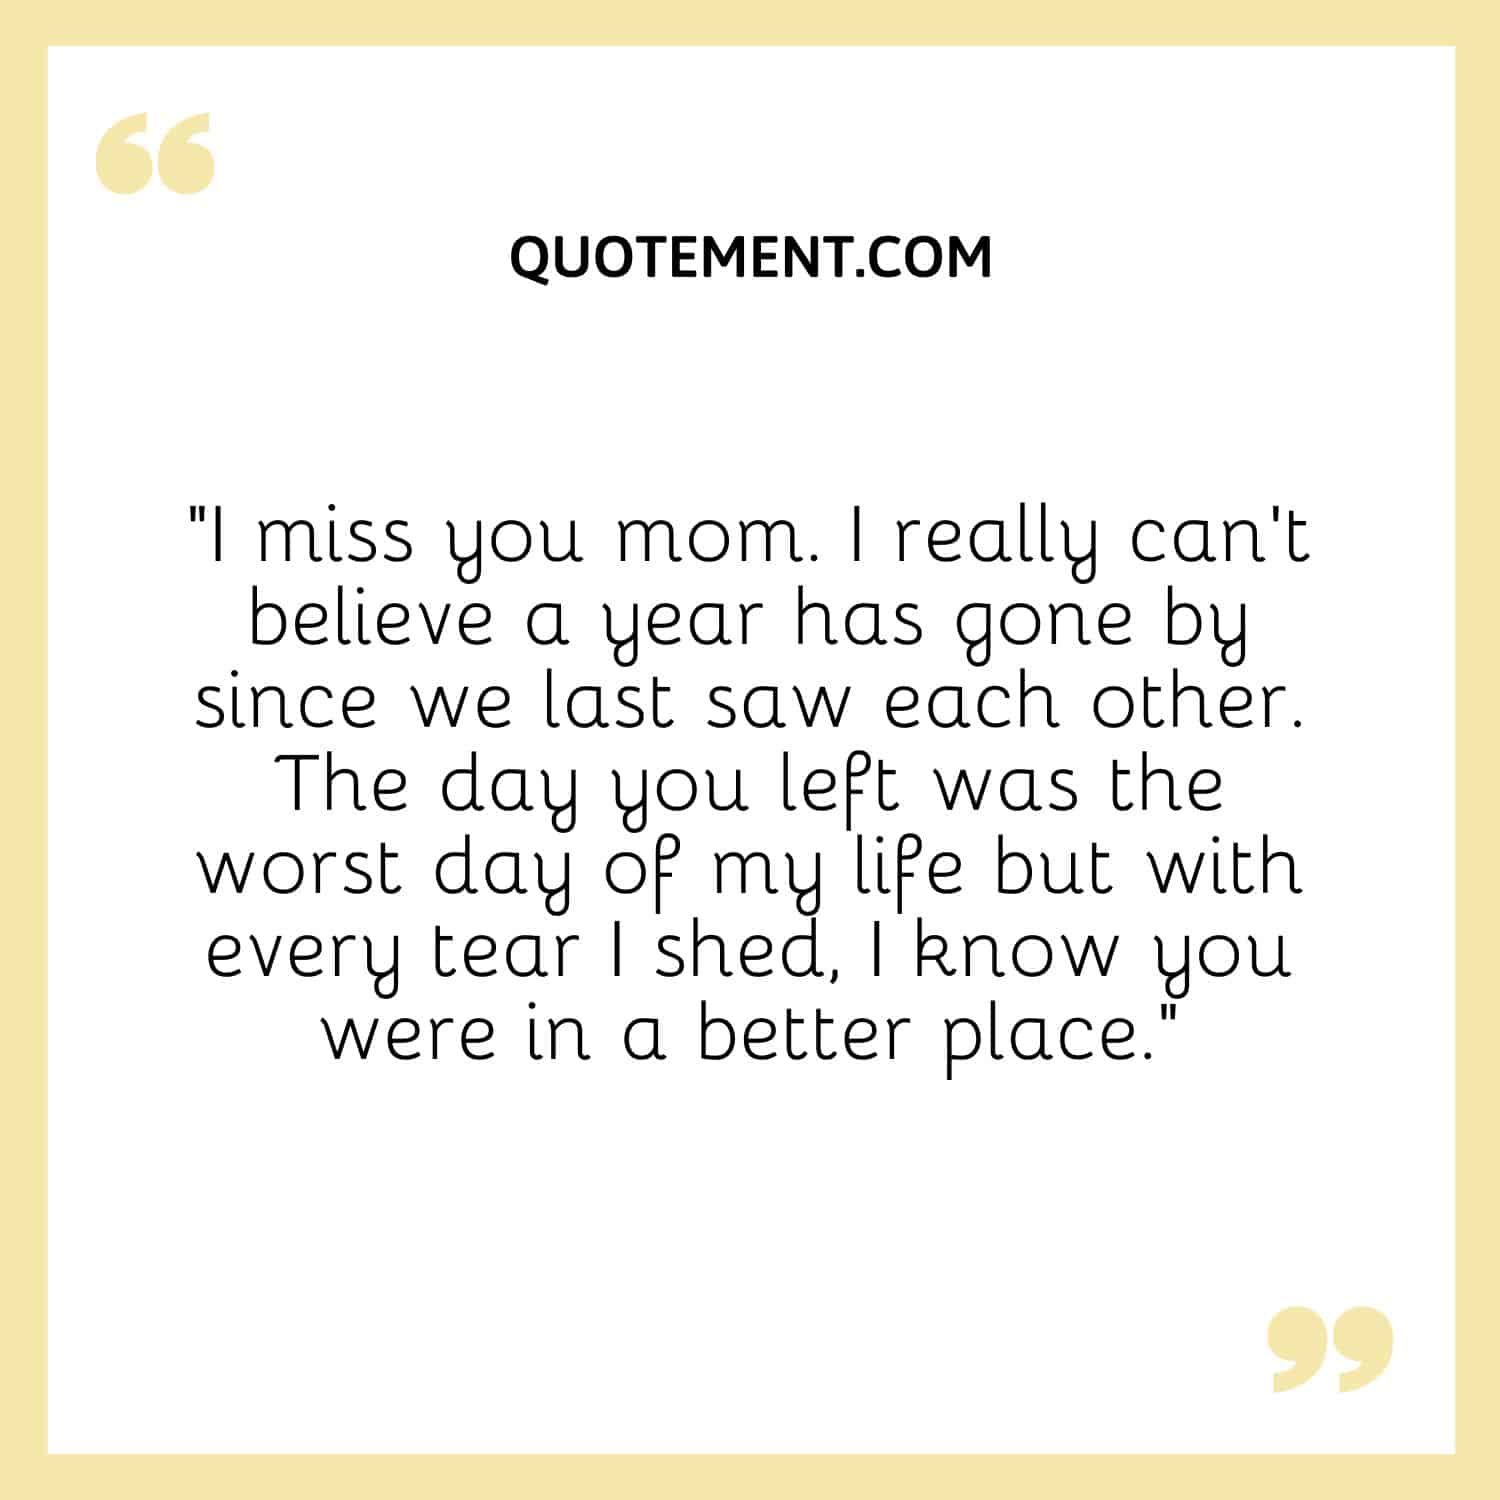 I miss you mom. I really can’t believe a year has gone by since we last saw each other